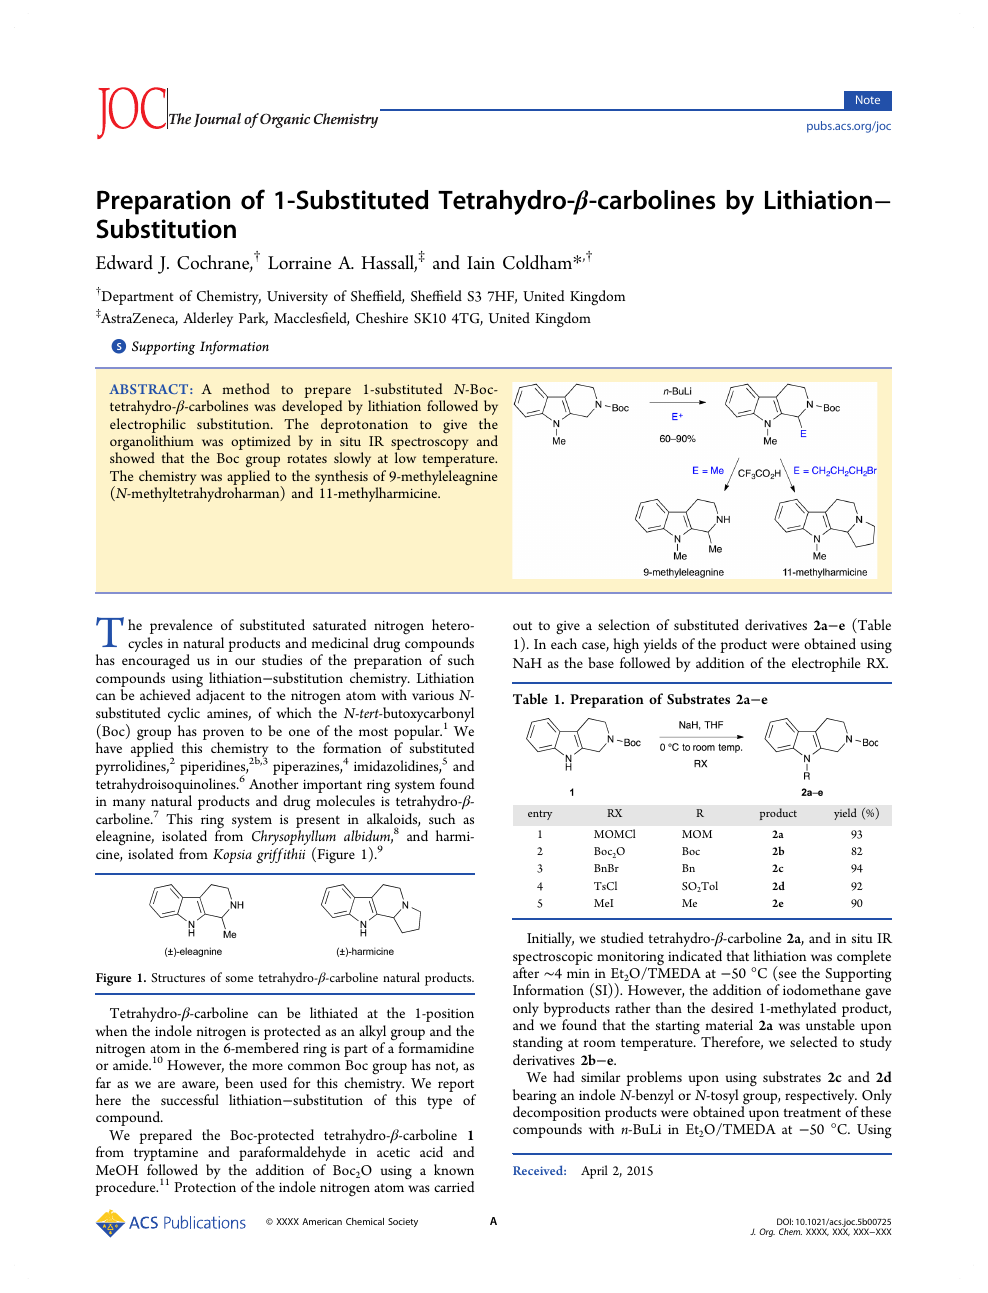 Preparation Of 1 Substituted Tetrahydro B Carbolines By Lithiation Substitution Topic Of Research Paper In Chemical Sciences Download Scholarly Article Pdf And Read For Free On Cyberleninka Open Science Hub